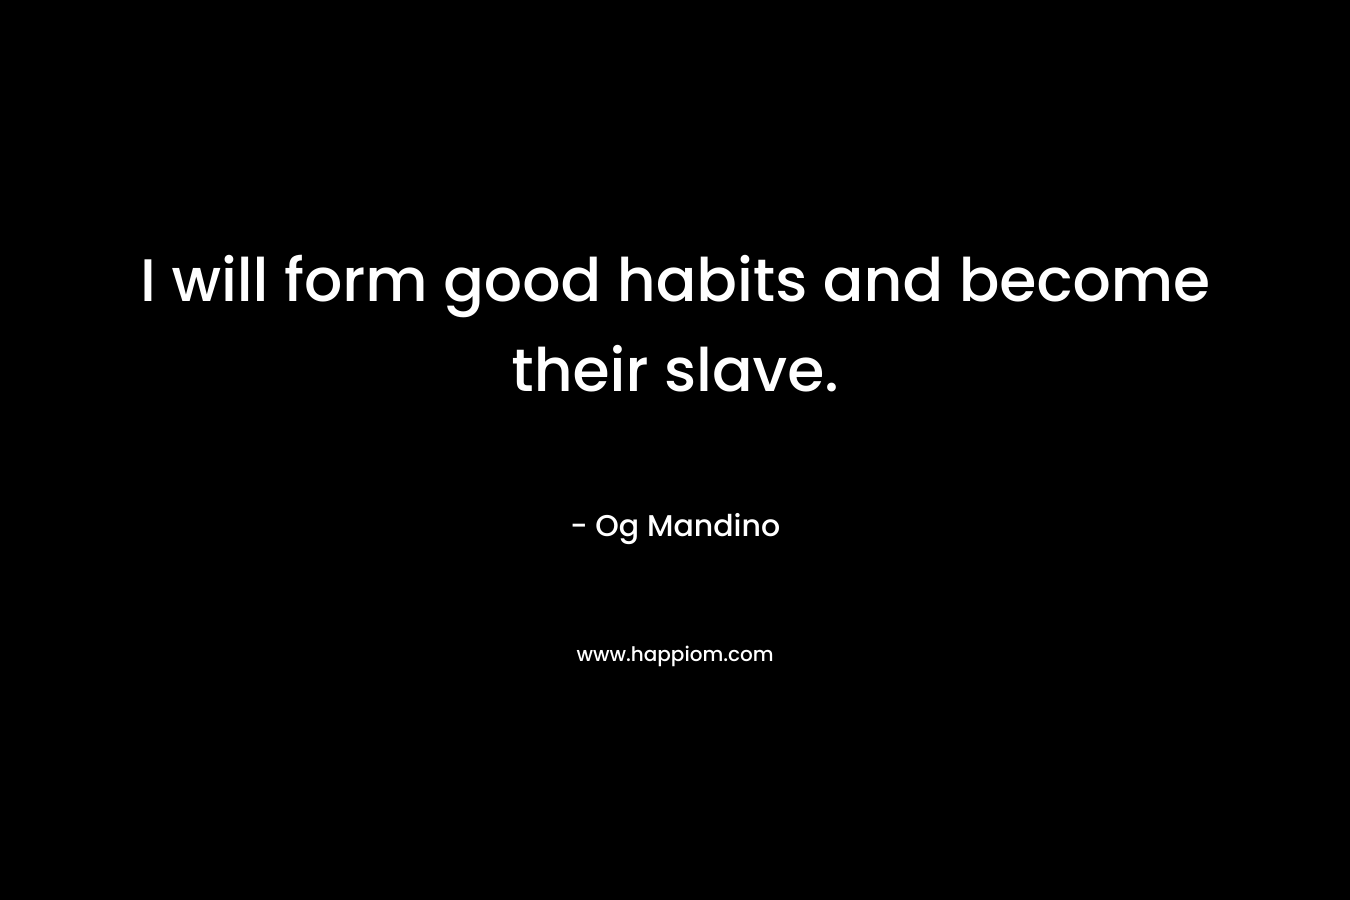 I will form good habits and become their slave.